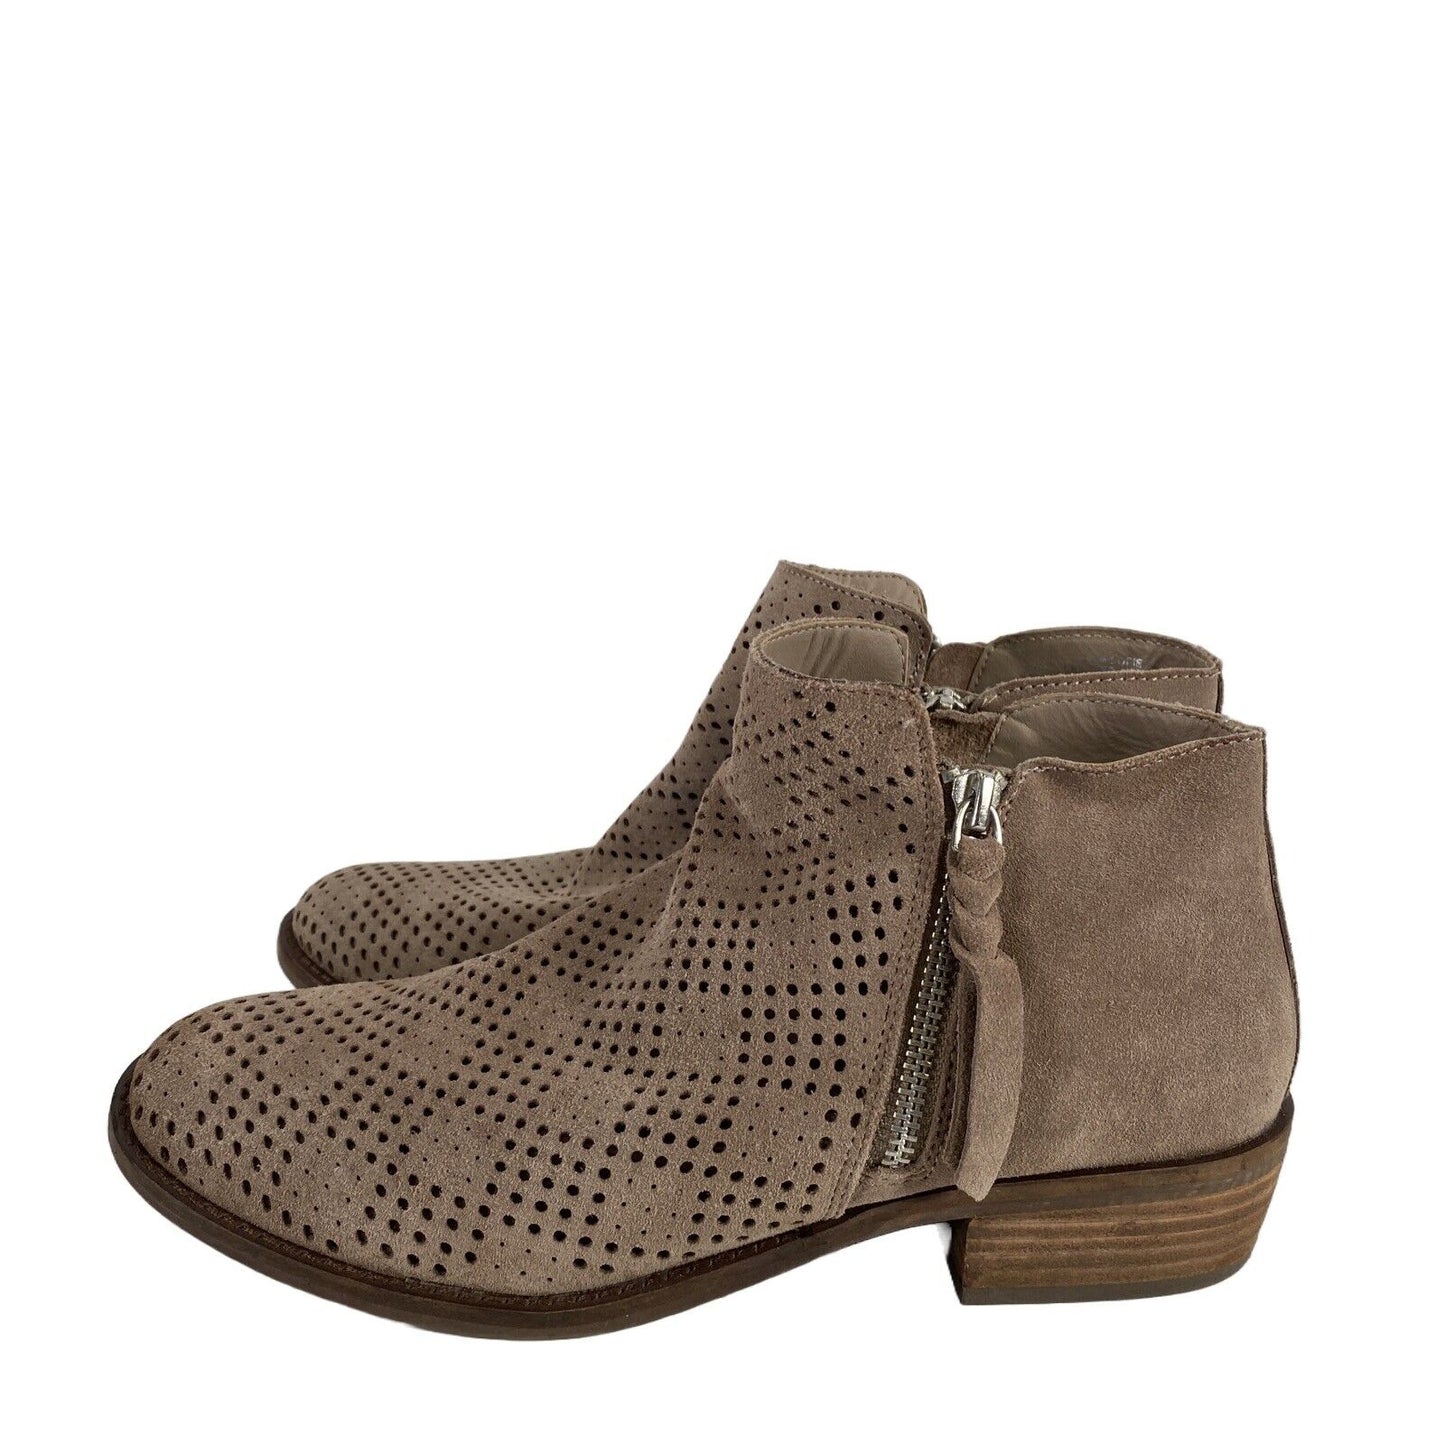 Dolce Vita Women's Beige Suede Perforated Side Zip Ankle Booties - 8.5